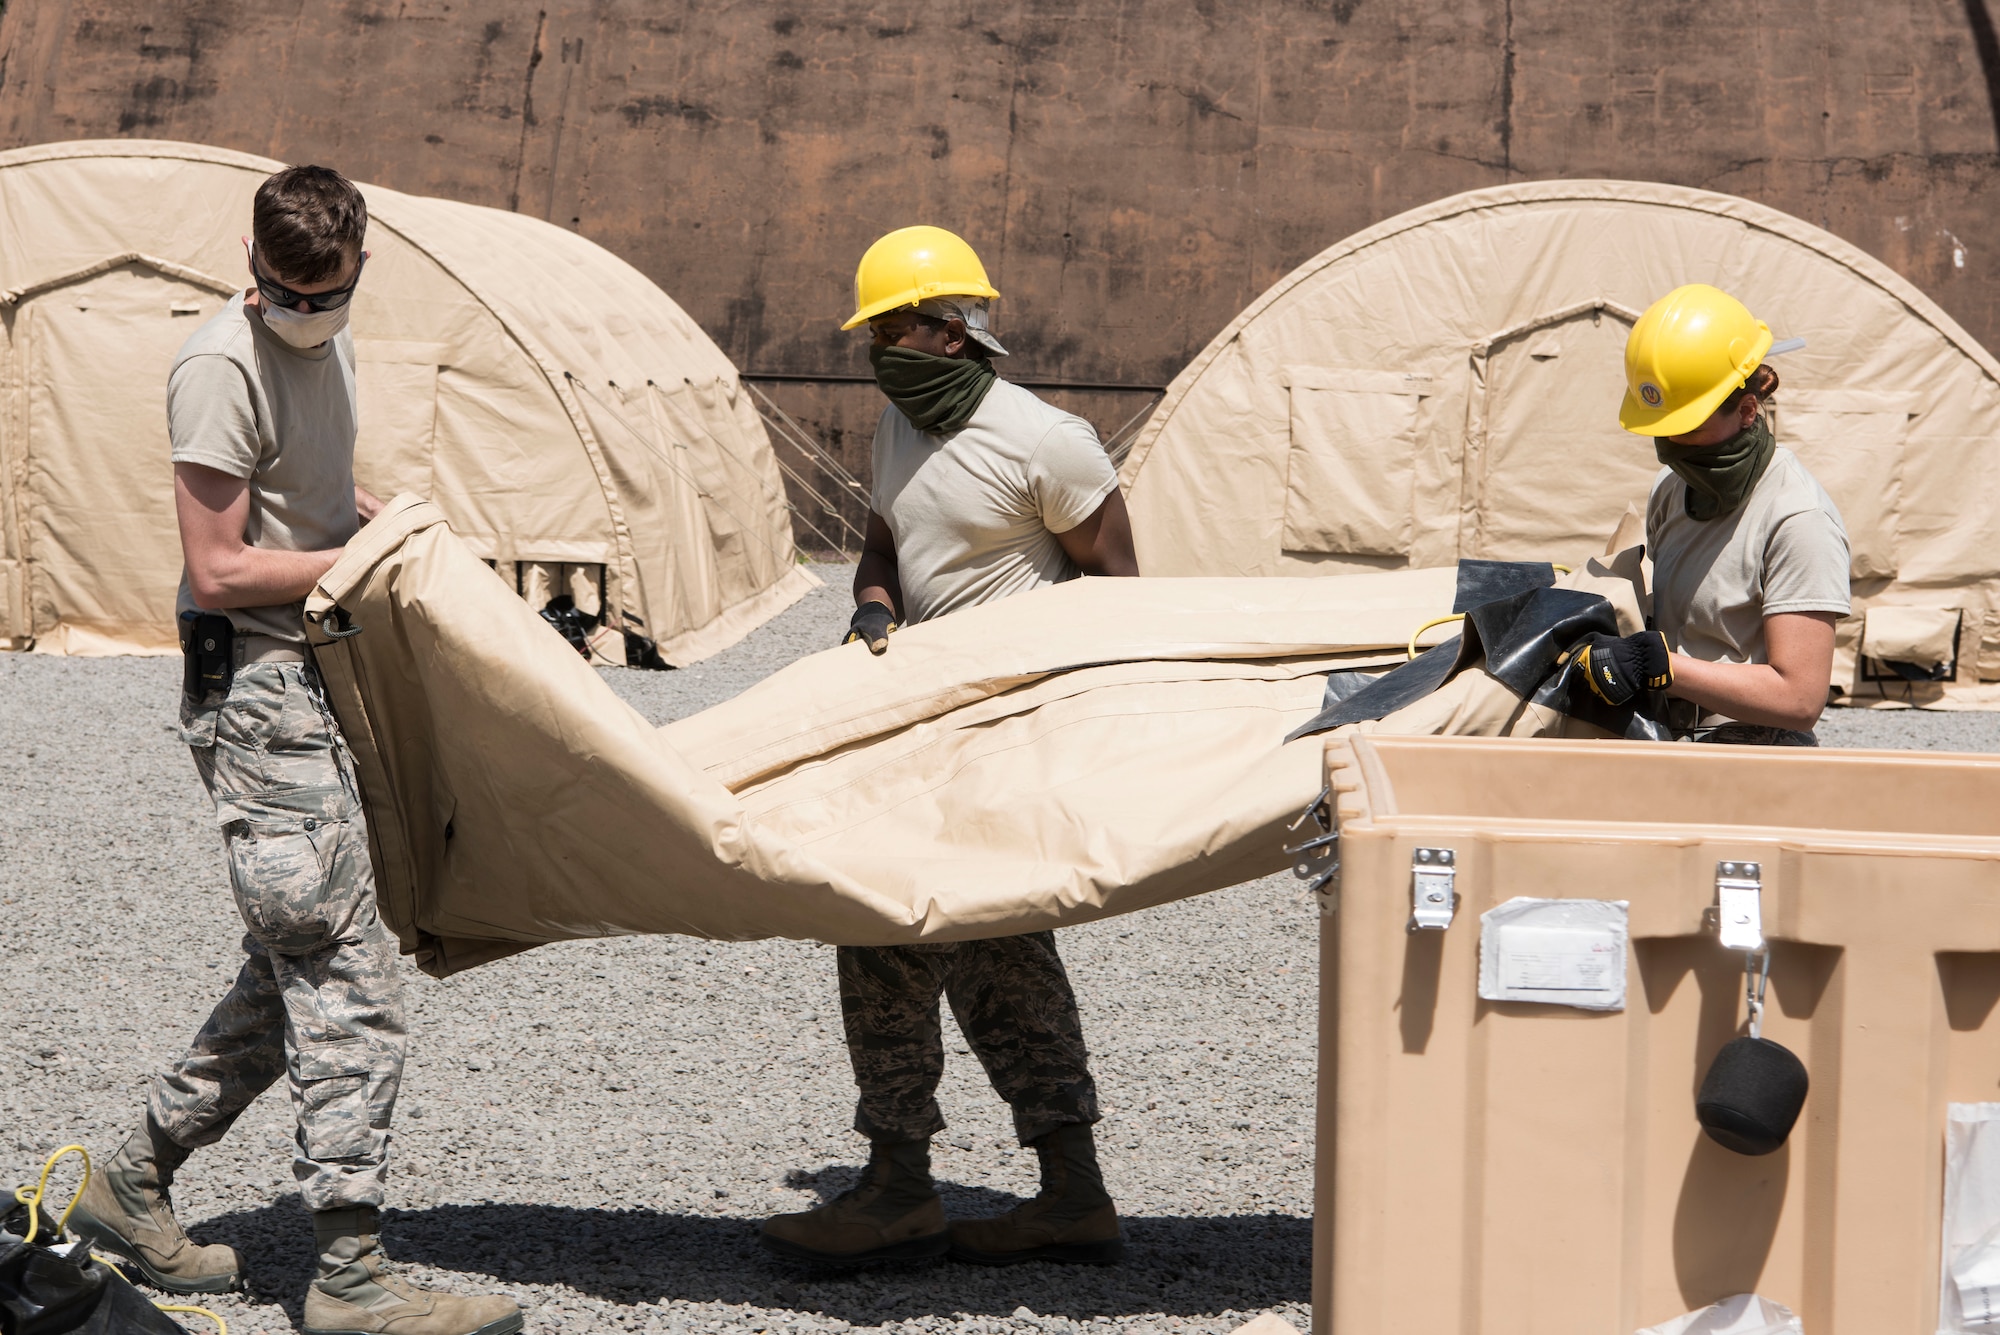 U.S. Air Force Airmen move tent materials during Silver Flag.